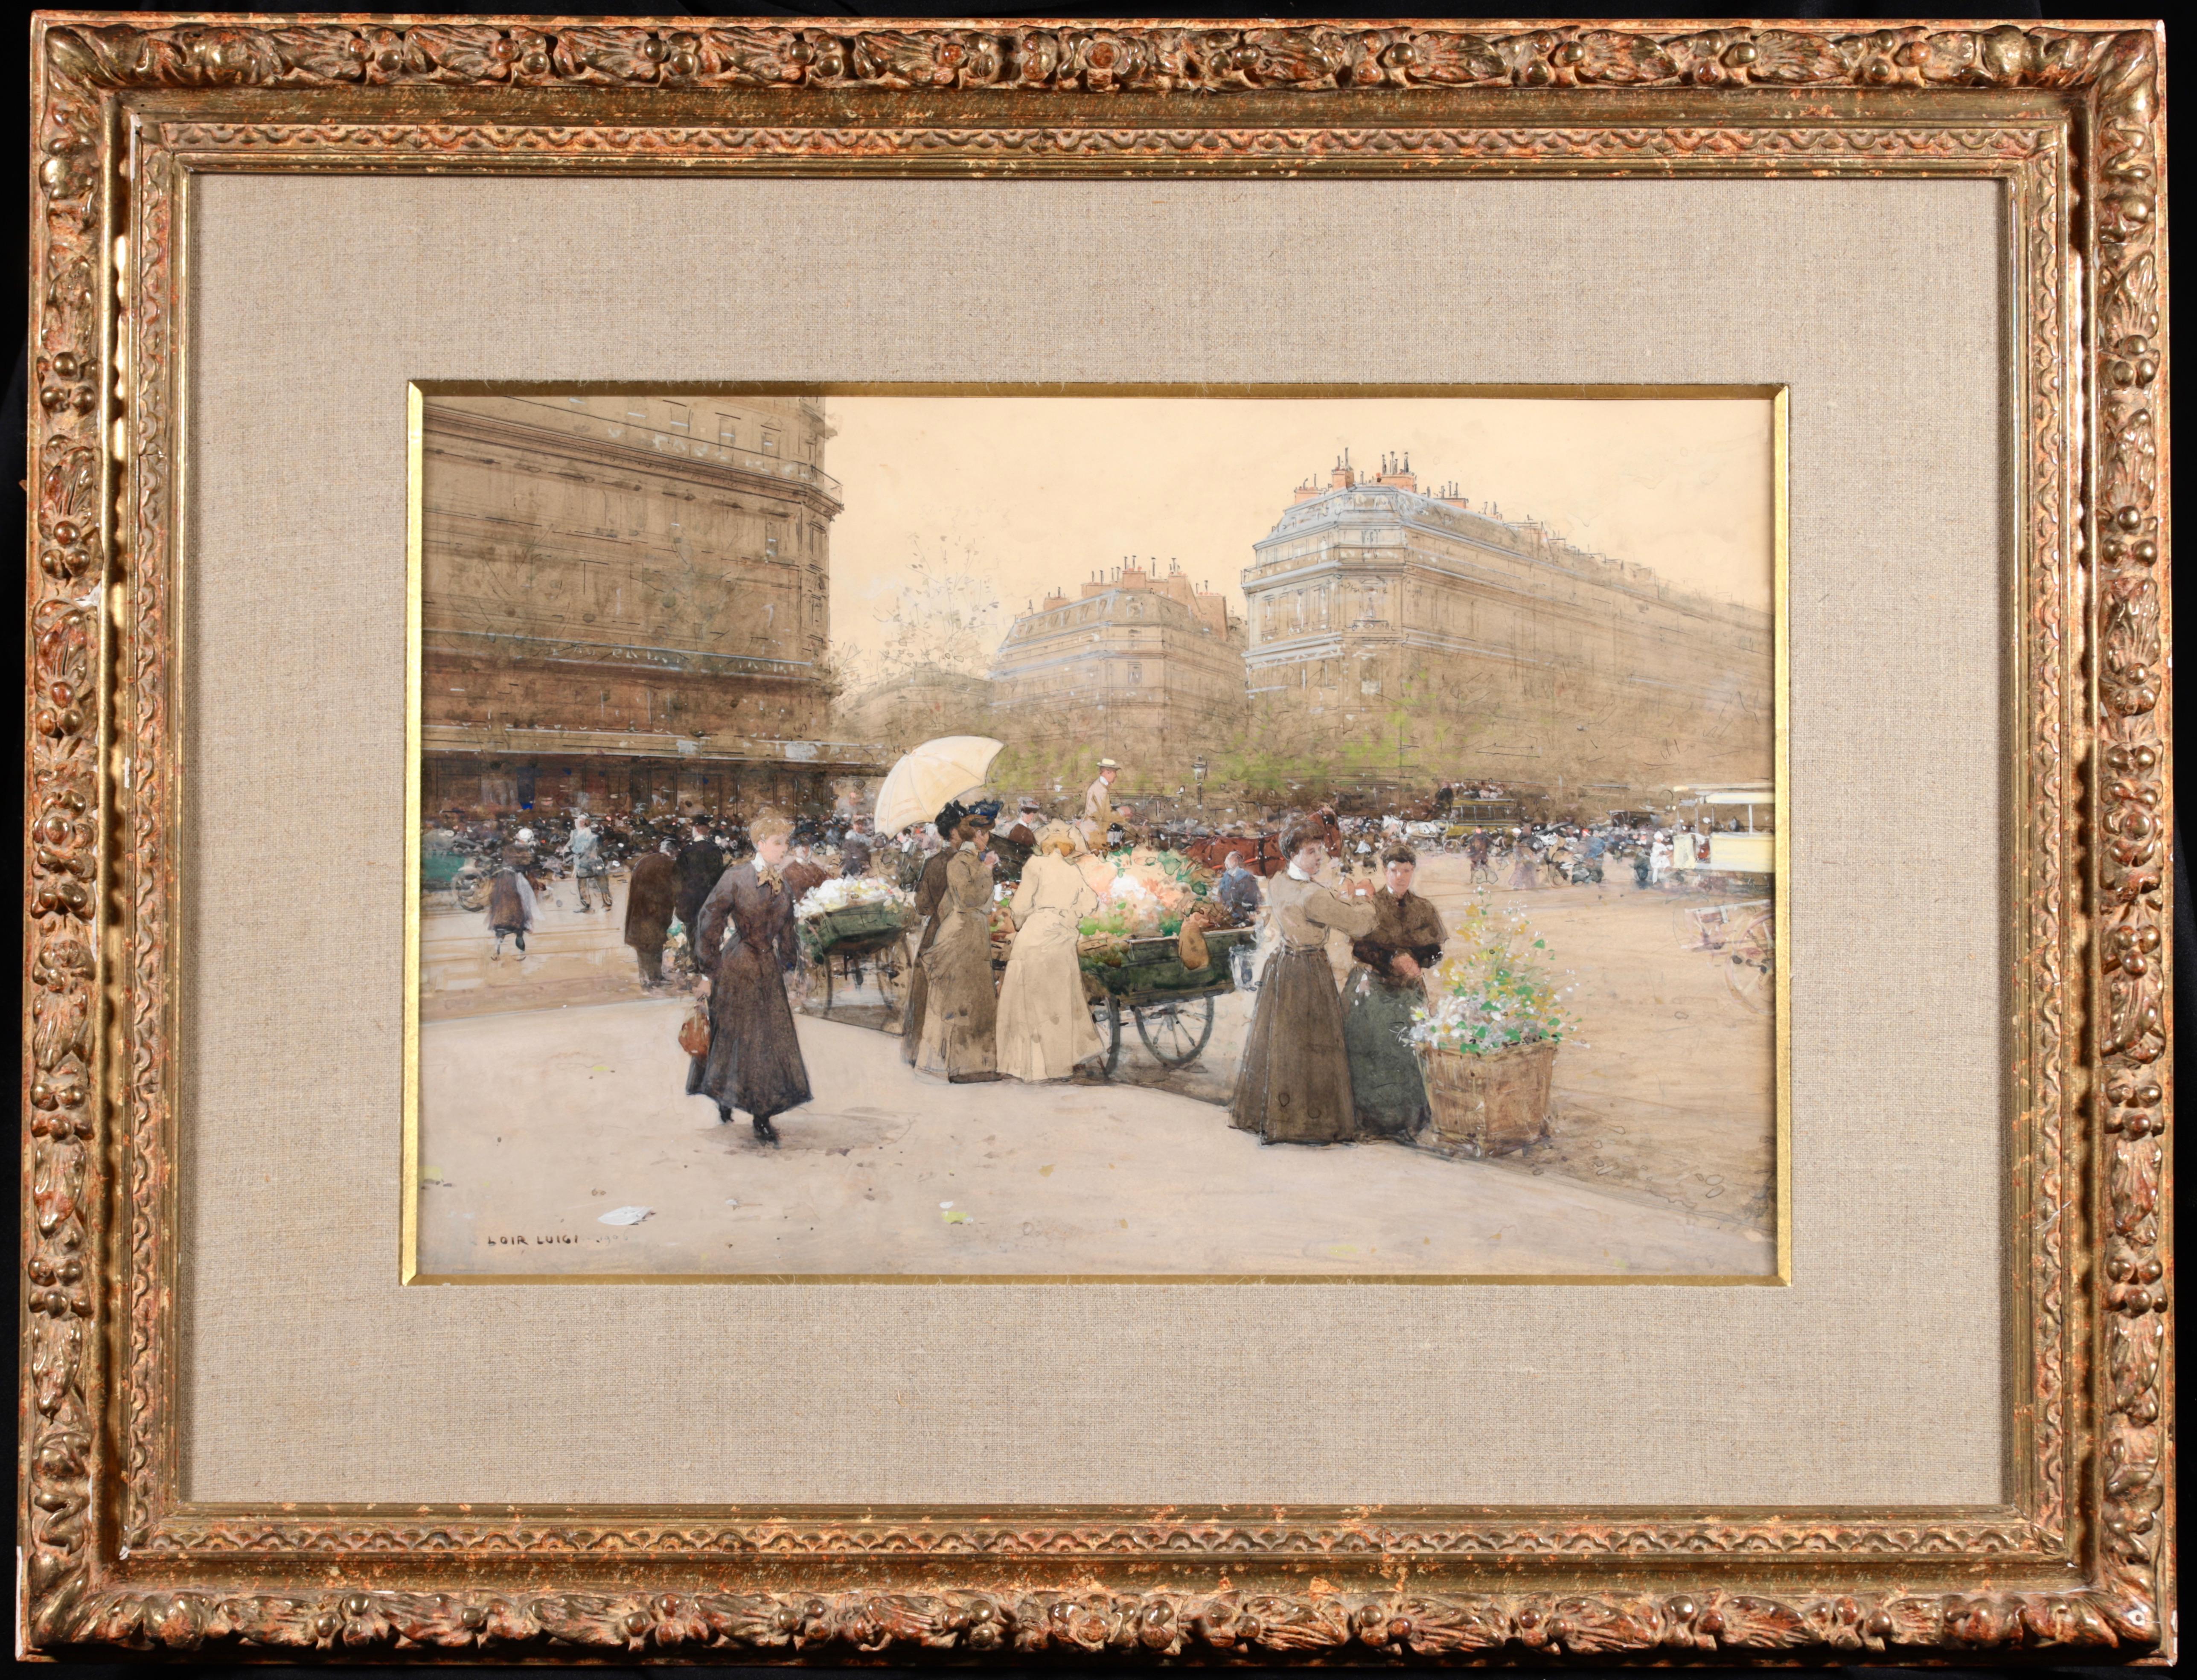 Signed and dated watercolour and gouache on board by French impressionist painter Luigi Loir. The work depicts elegantly dressed women buying flowers at a bustling market in the Grand Boulevard in Paris, France. 

Signature:
Signed lower left and